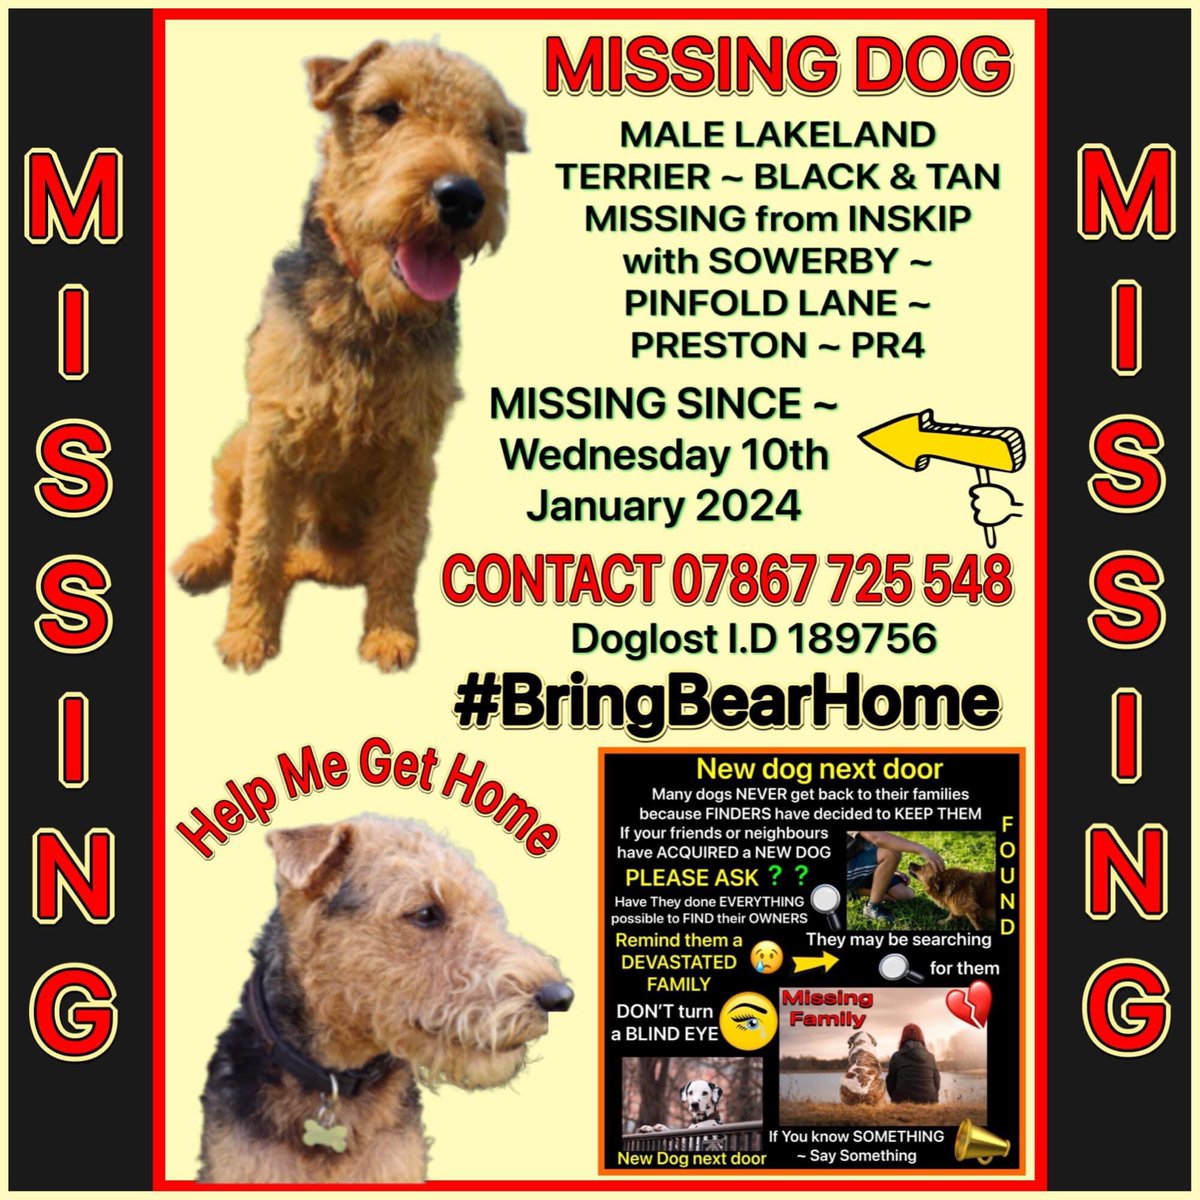 Please join us to help #BringBearHome Black & Tan Lakeland Terrier BEAR went #missing 10 January 2024 in Inskip #Preston Pinfold Lane/ Moss lane #PR4 He has a docked tail, chipped & details are all up to date
@KarenFi51820768 @rosiedoc666 @MissingPetsGB @AlanDaffern @BethRees2